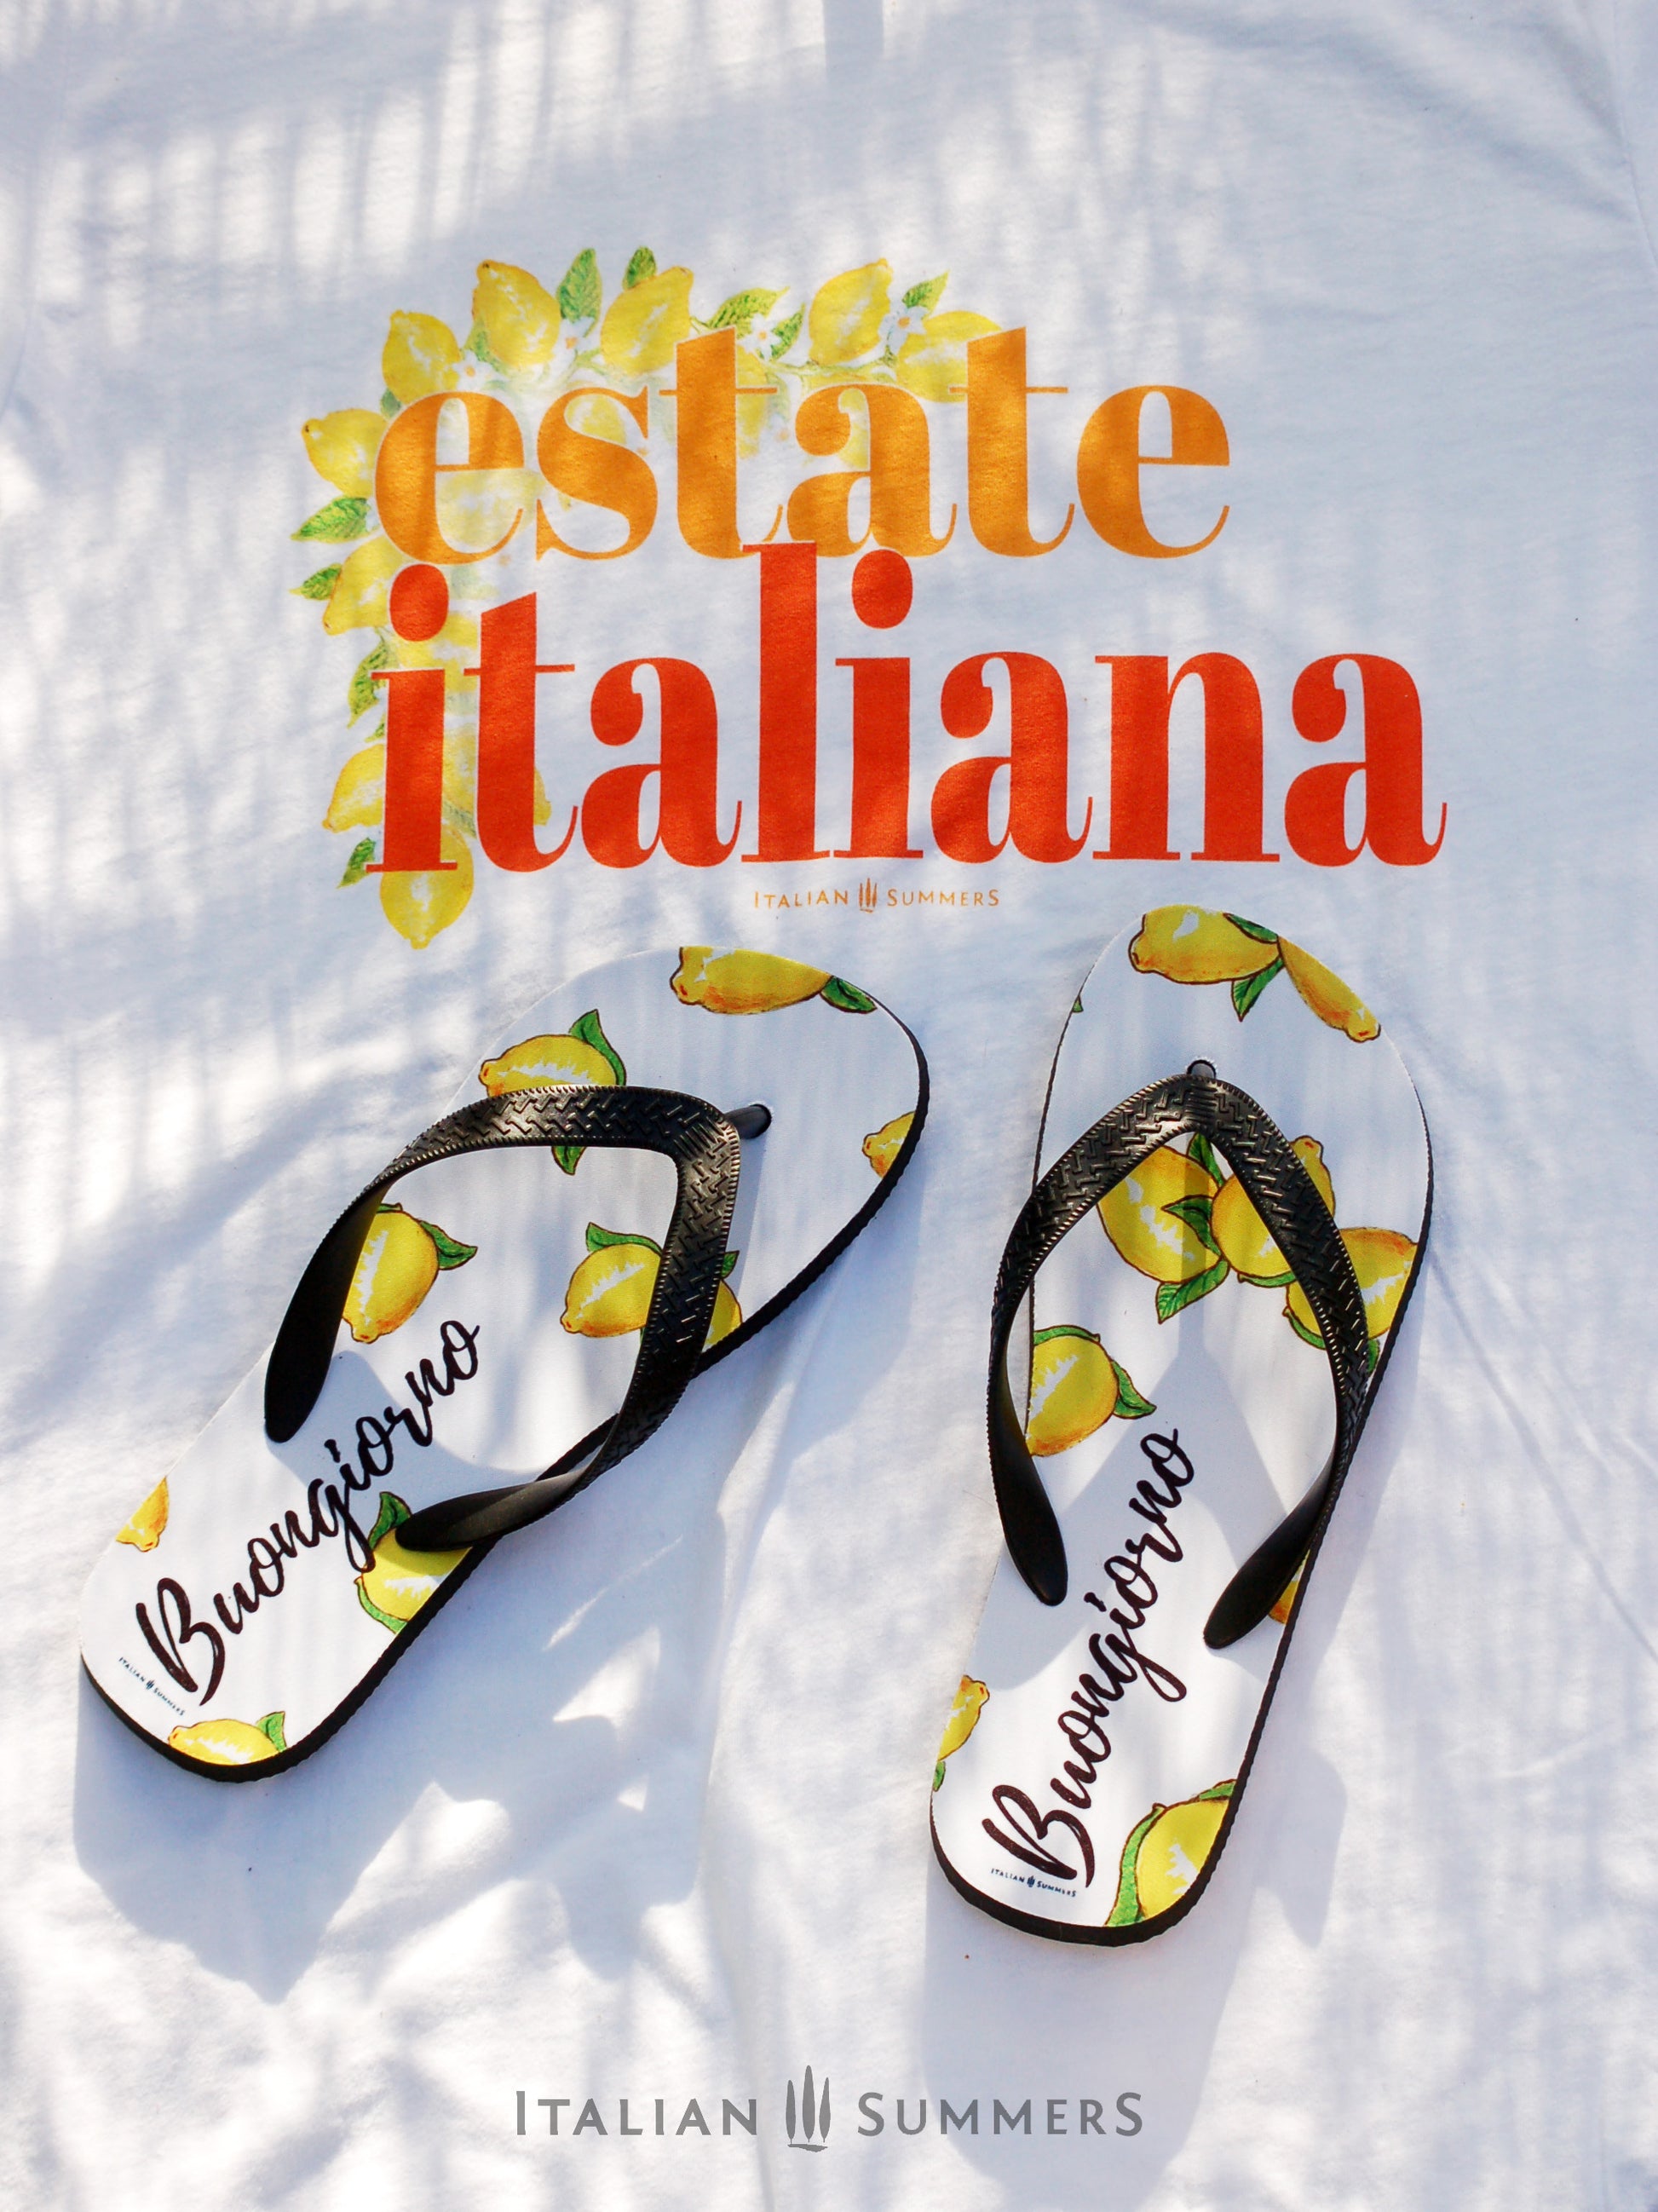 Slip into a pair of Buongiorno Limoni flip flops for a taste of Italy's sunny charm. Our stylish lemon-decorated flip flops bring the dolce vita to your next alfresco affair. Made by Italian Summers